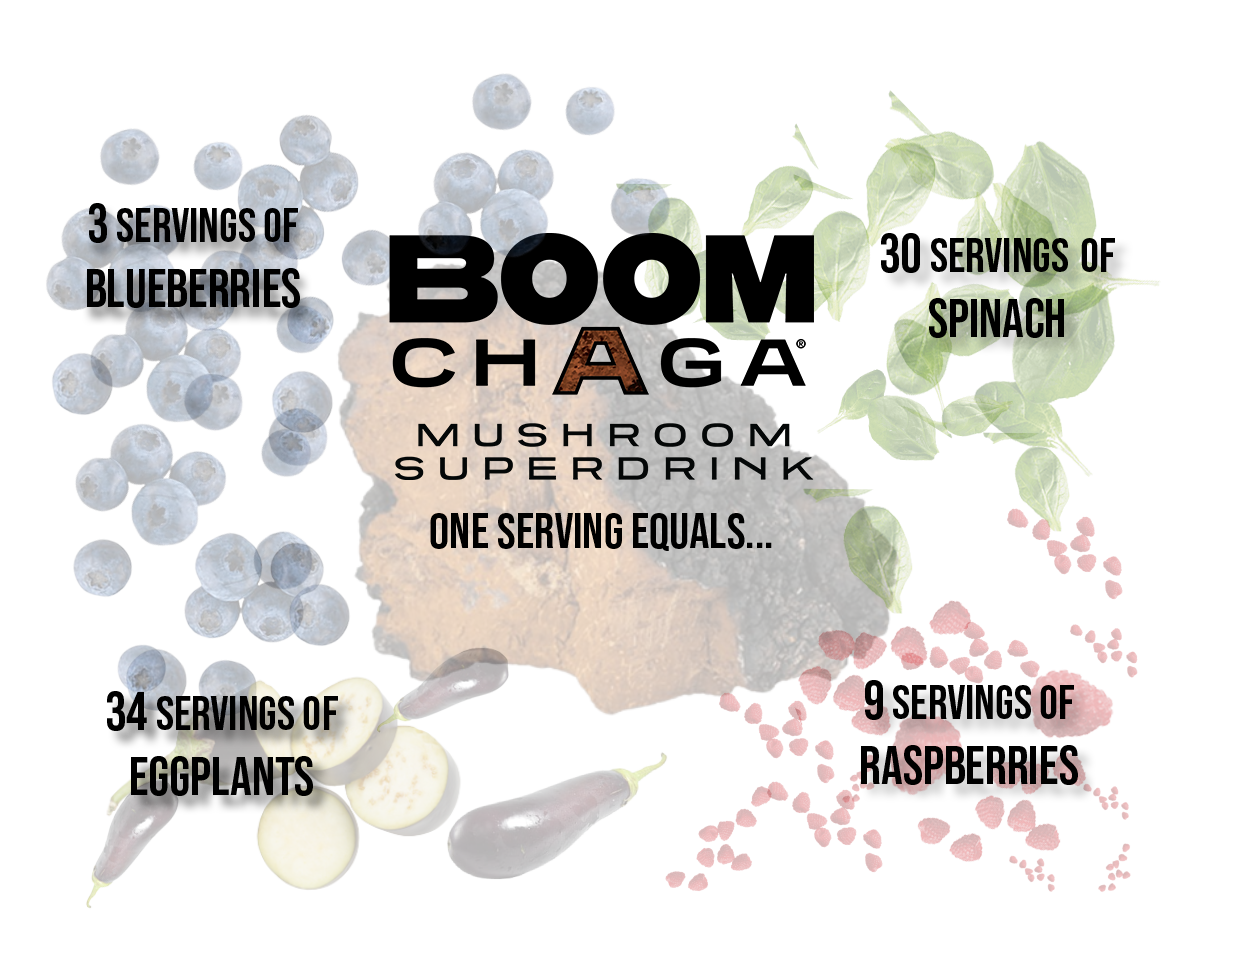 Chaga is the King of Superfoods